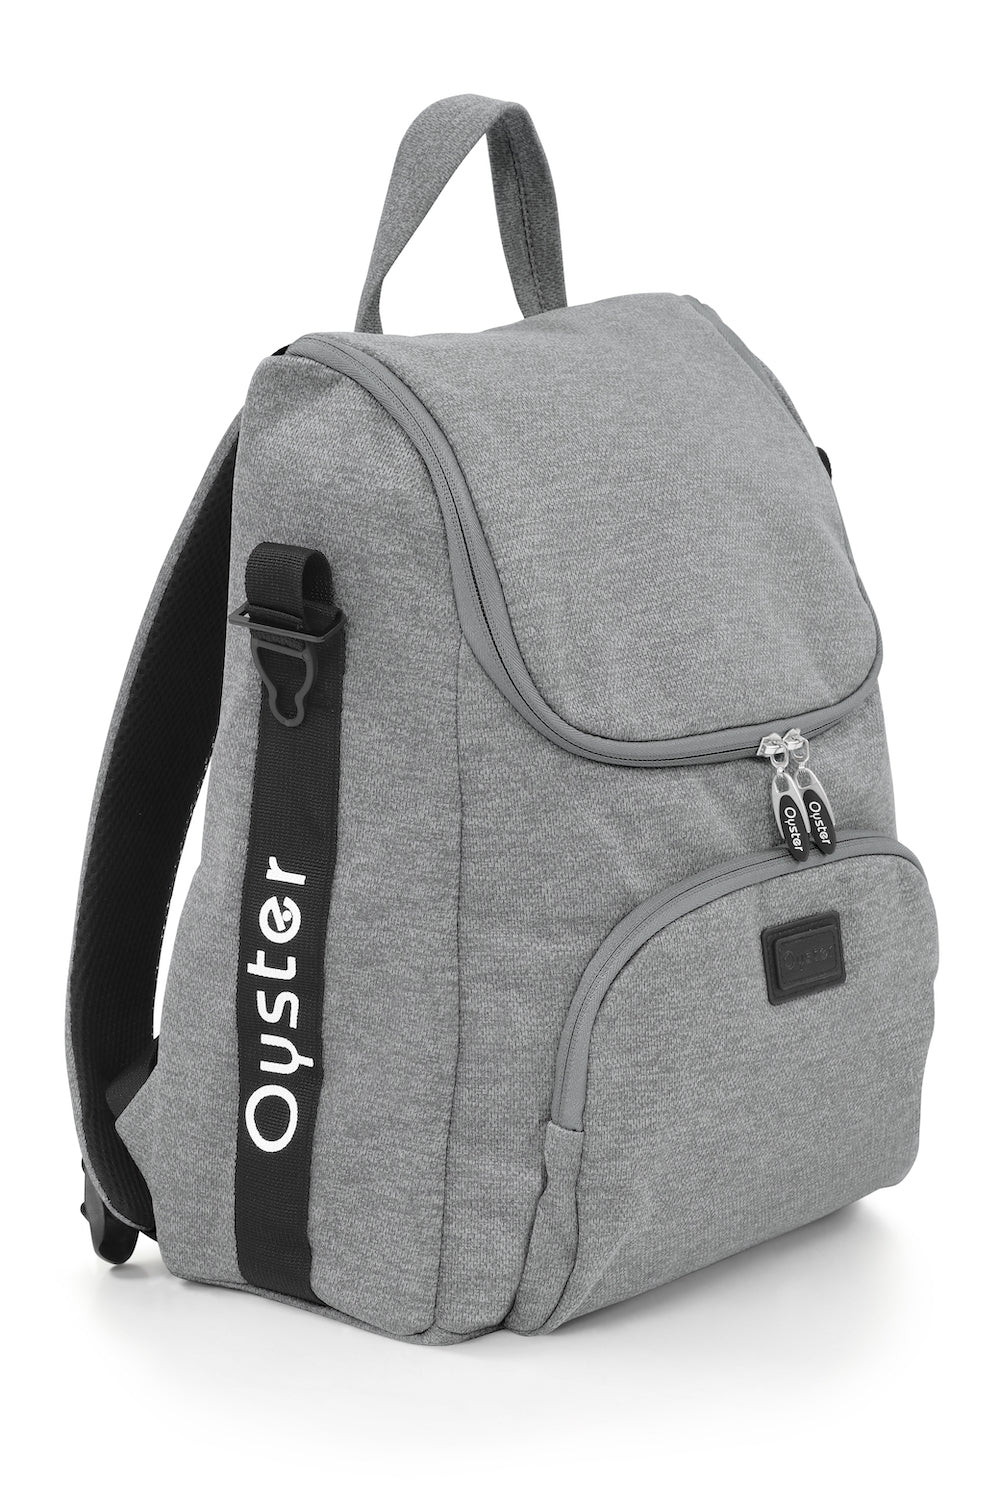 Oyster 3 Changing Bag | Moon